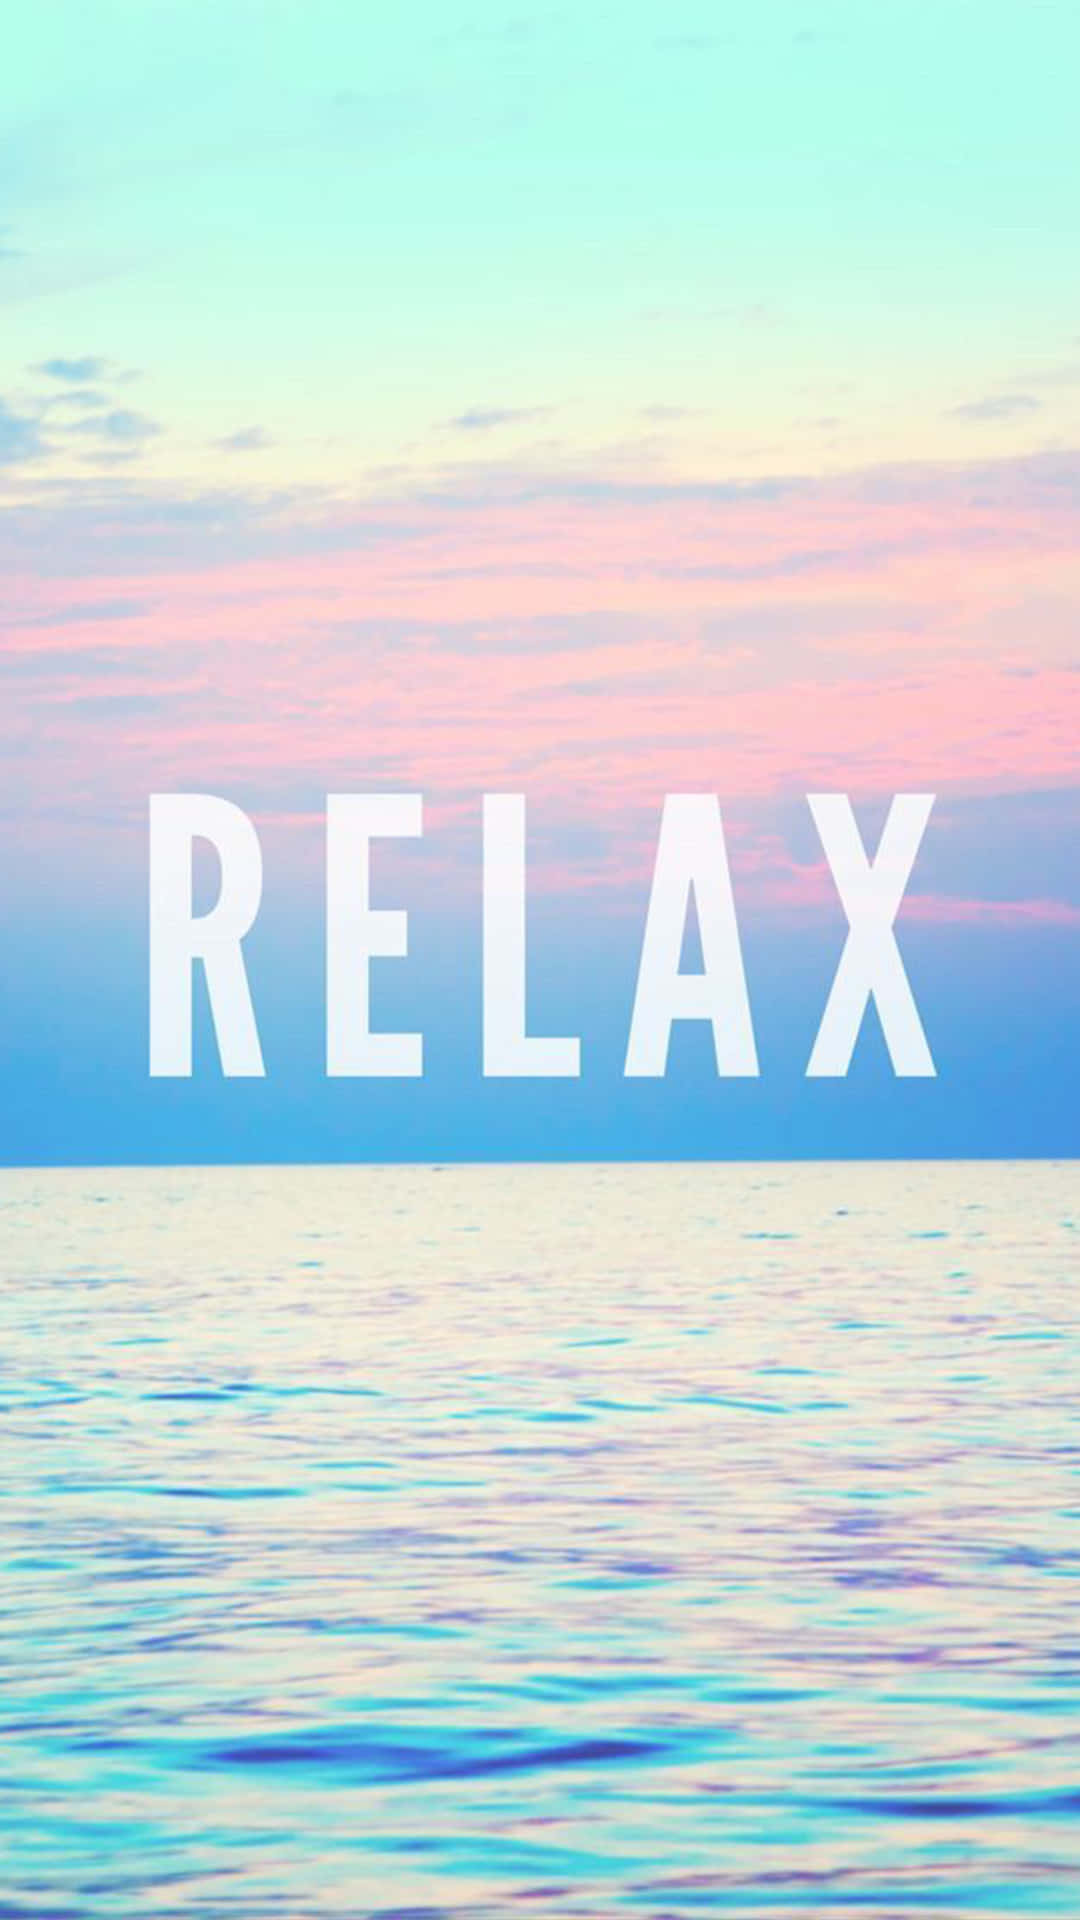 A Blue Sky With The Words Relax On It Wallpaper